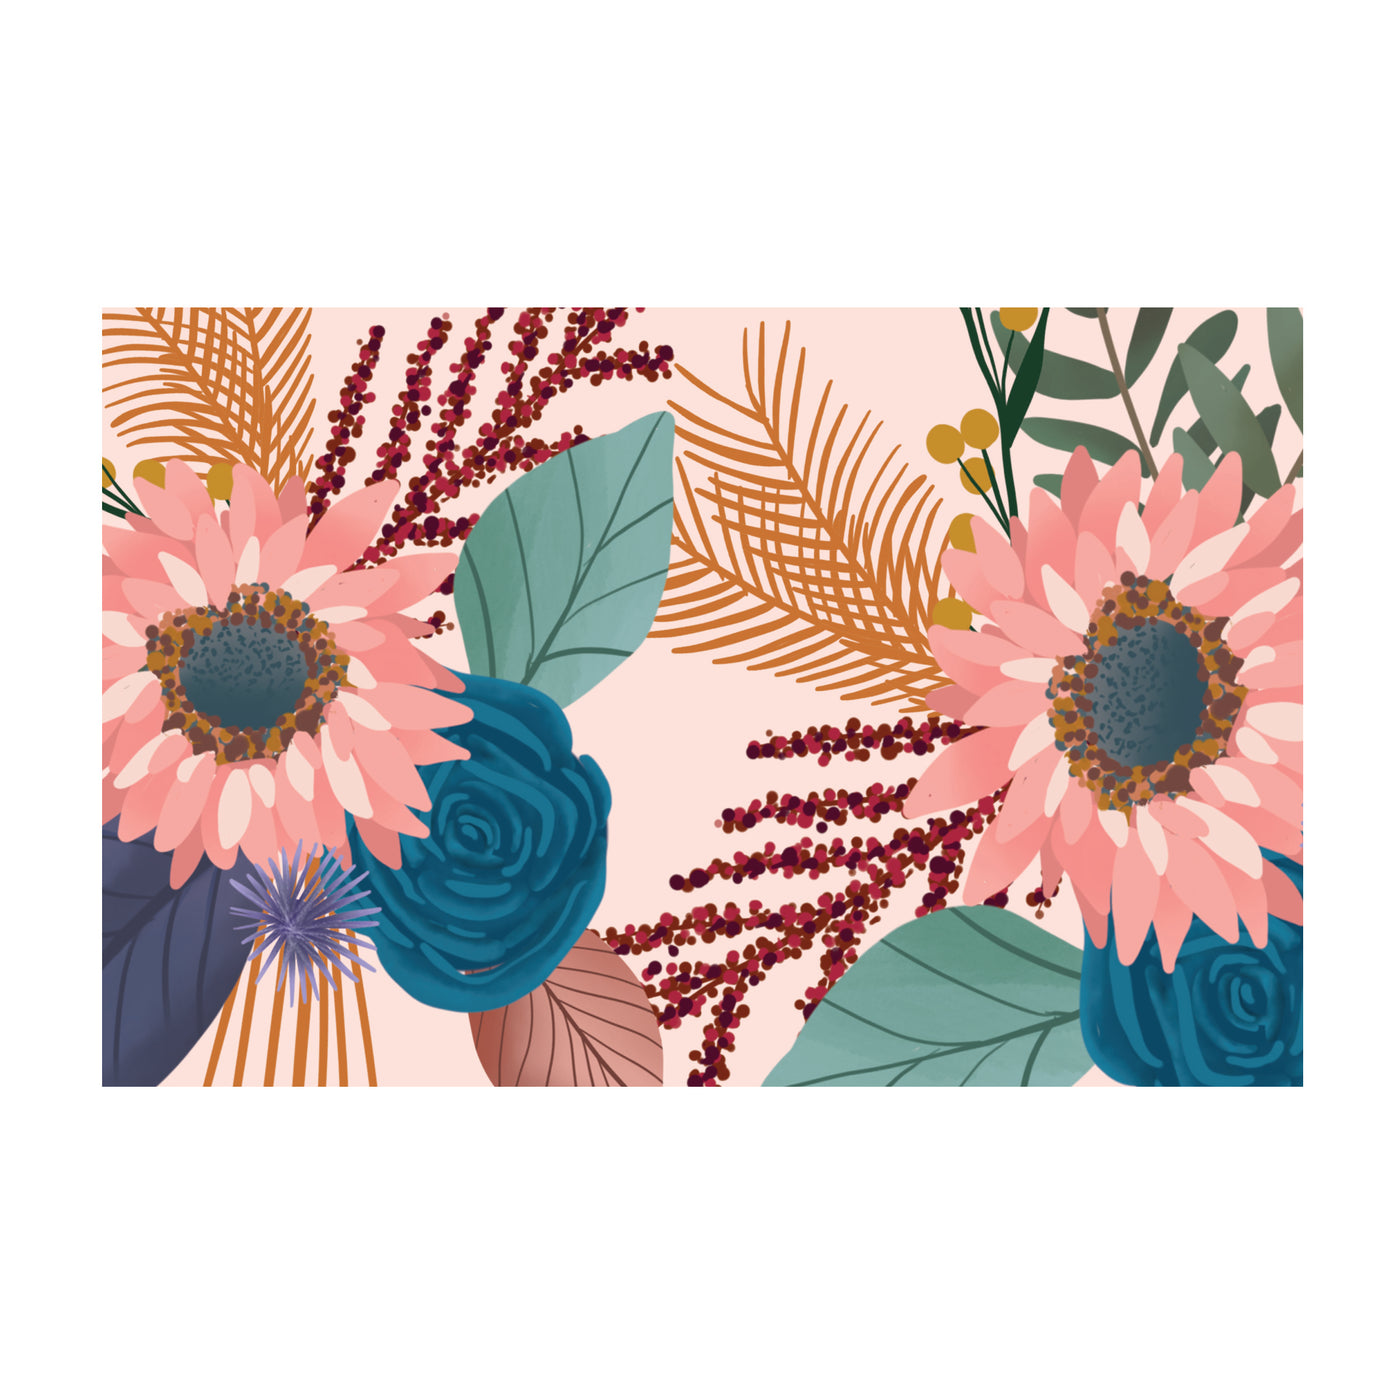 Floral Bunches Paper Placemats - Thimblepress